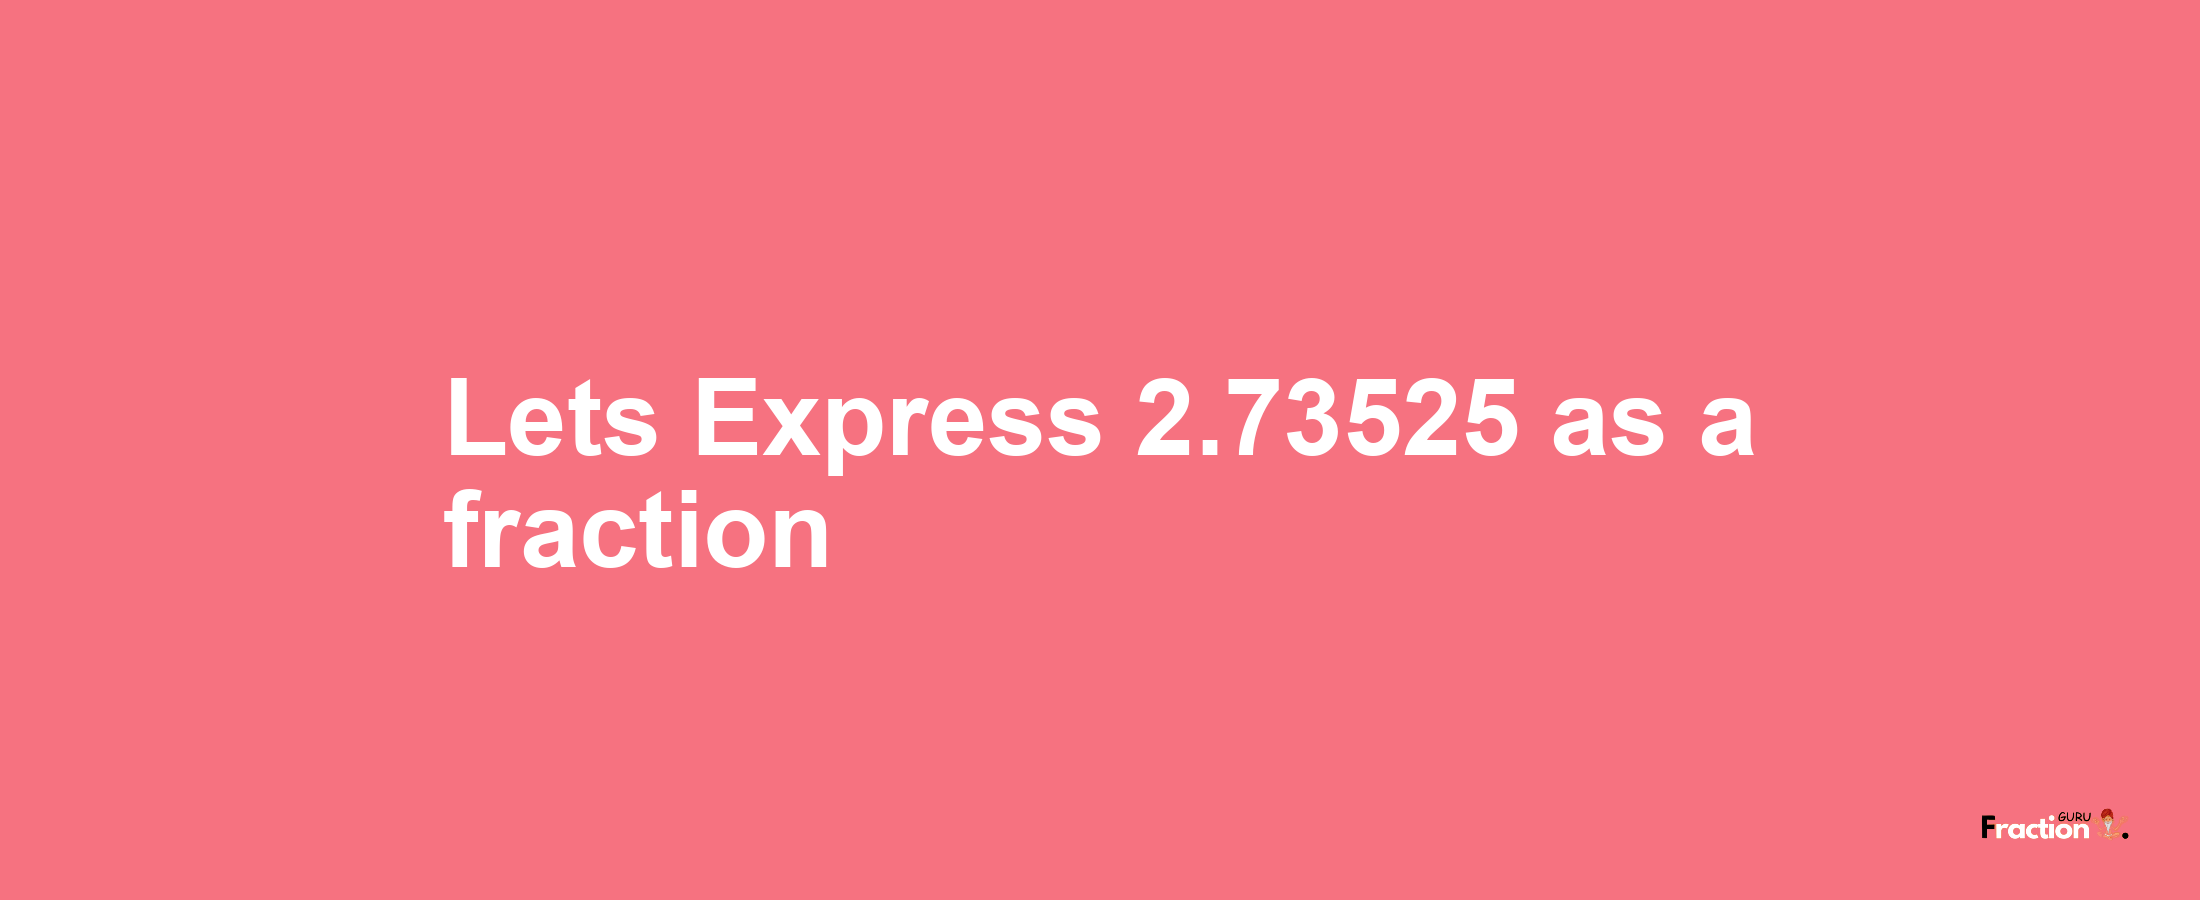 Lets Express 2.73525 as afraction